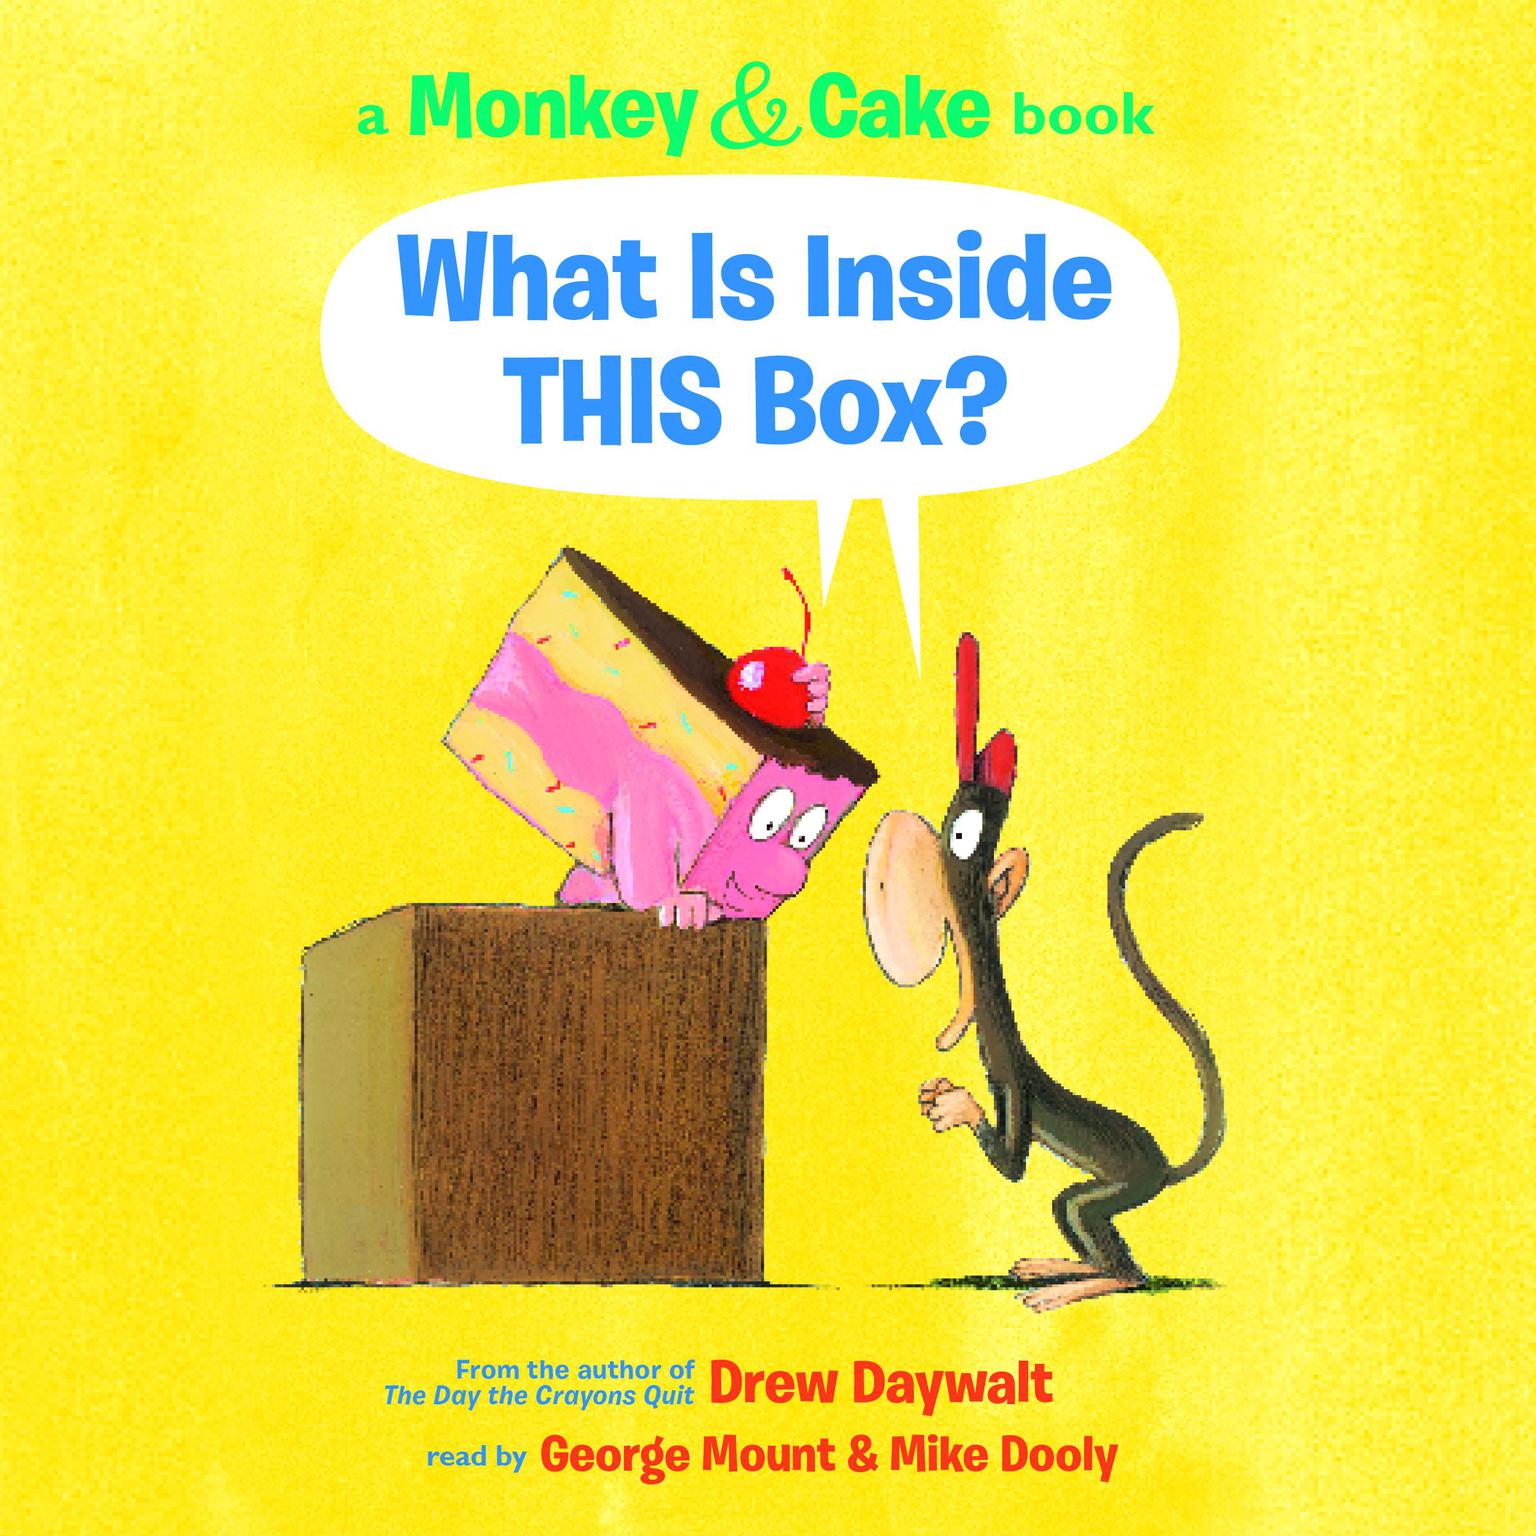 What Is Inside THIS Box? (Monkey & Cake) Audiobook, by Drew Daywalt